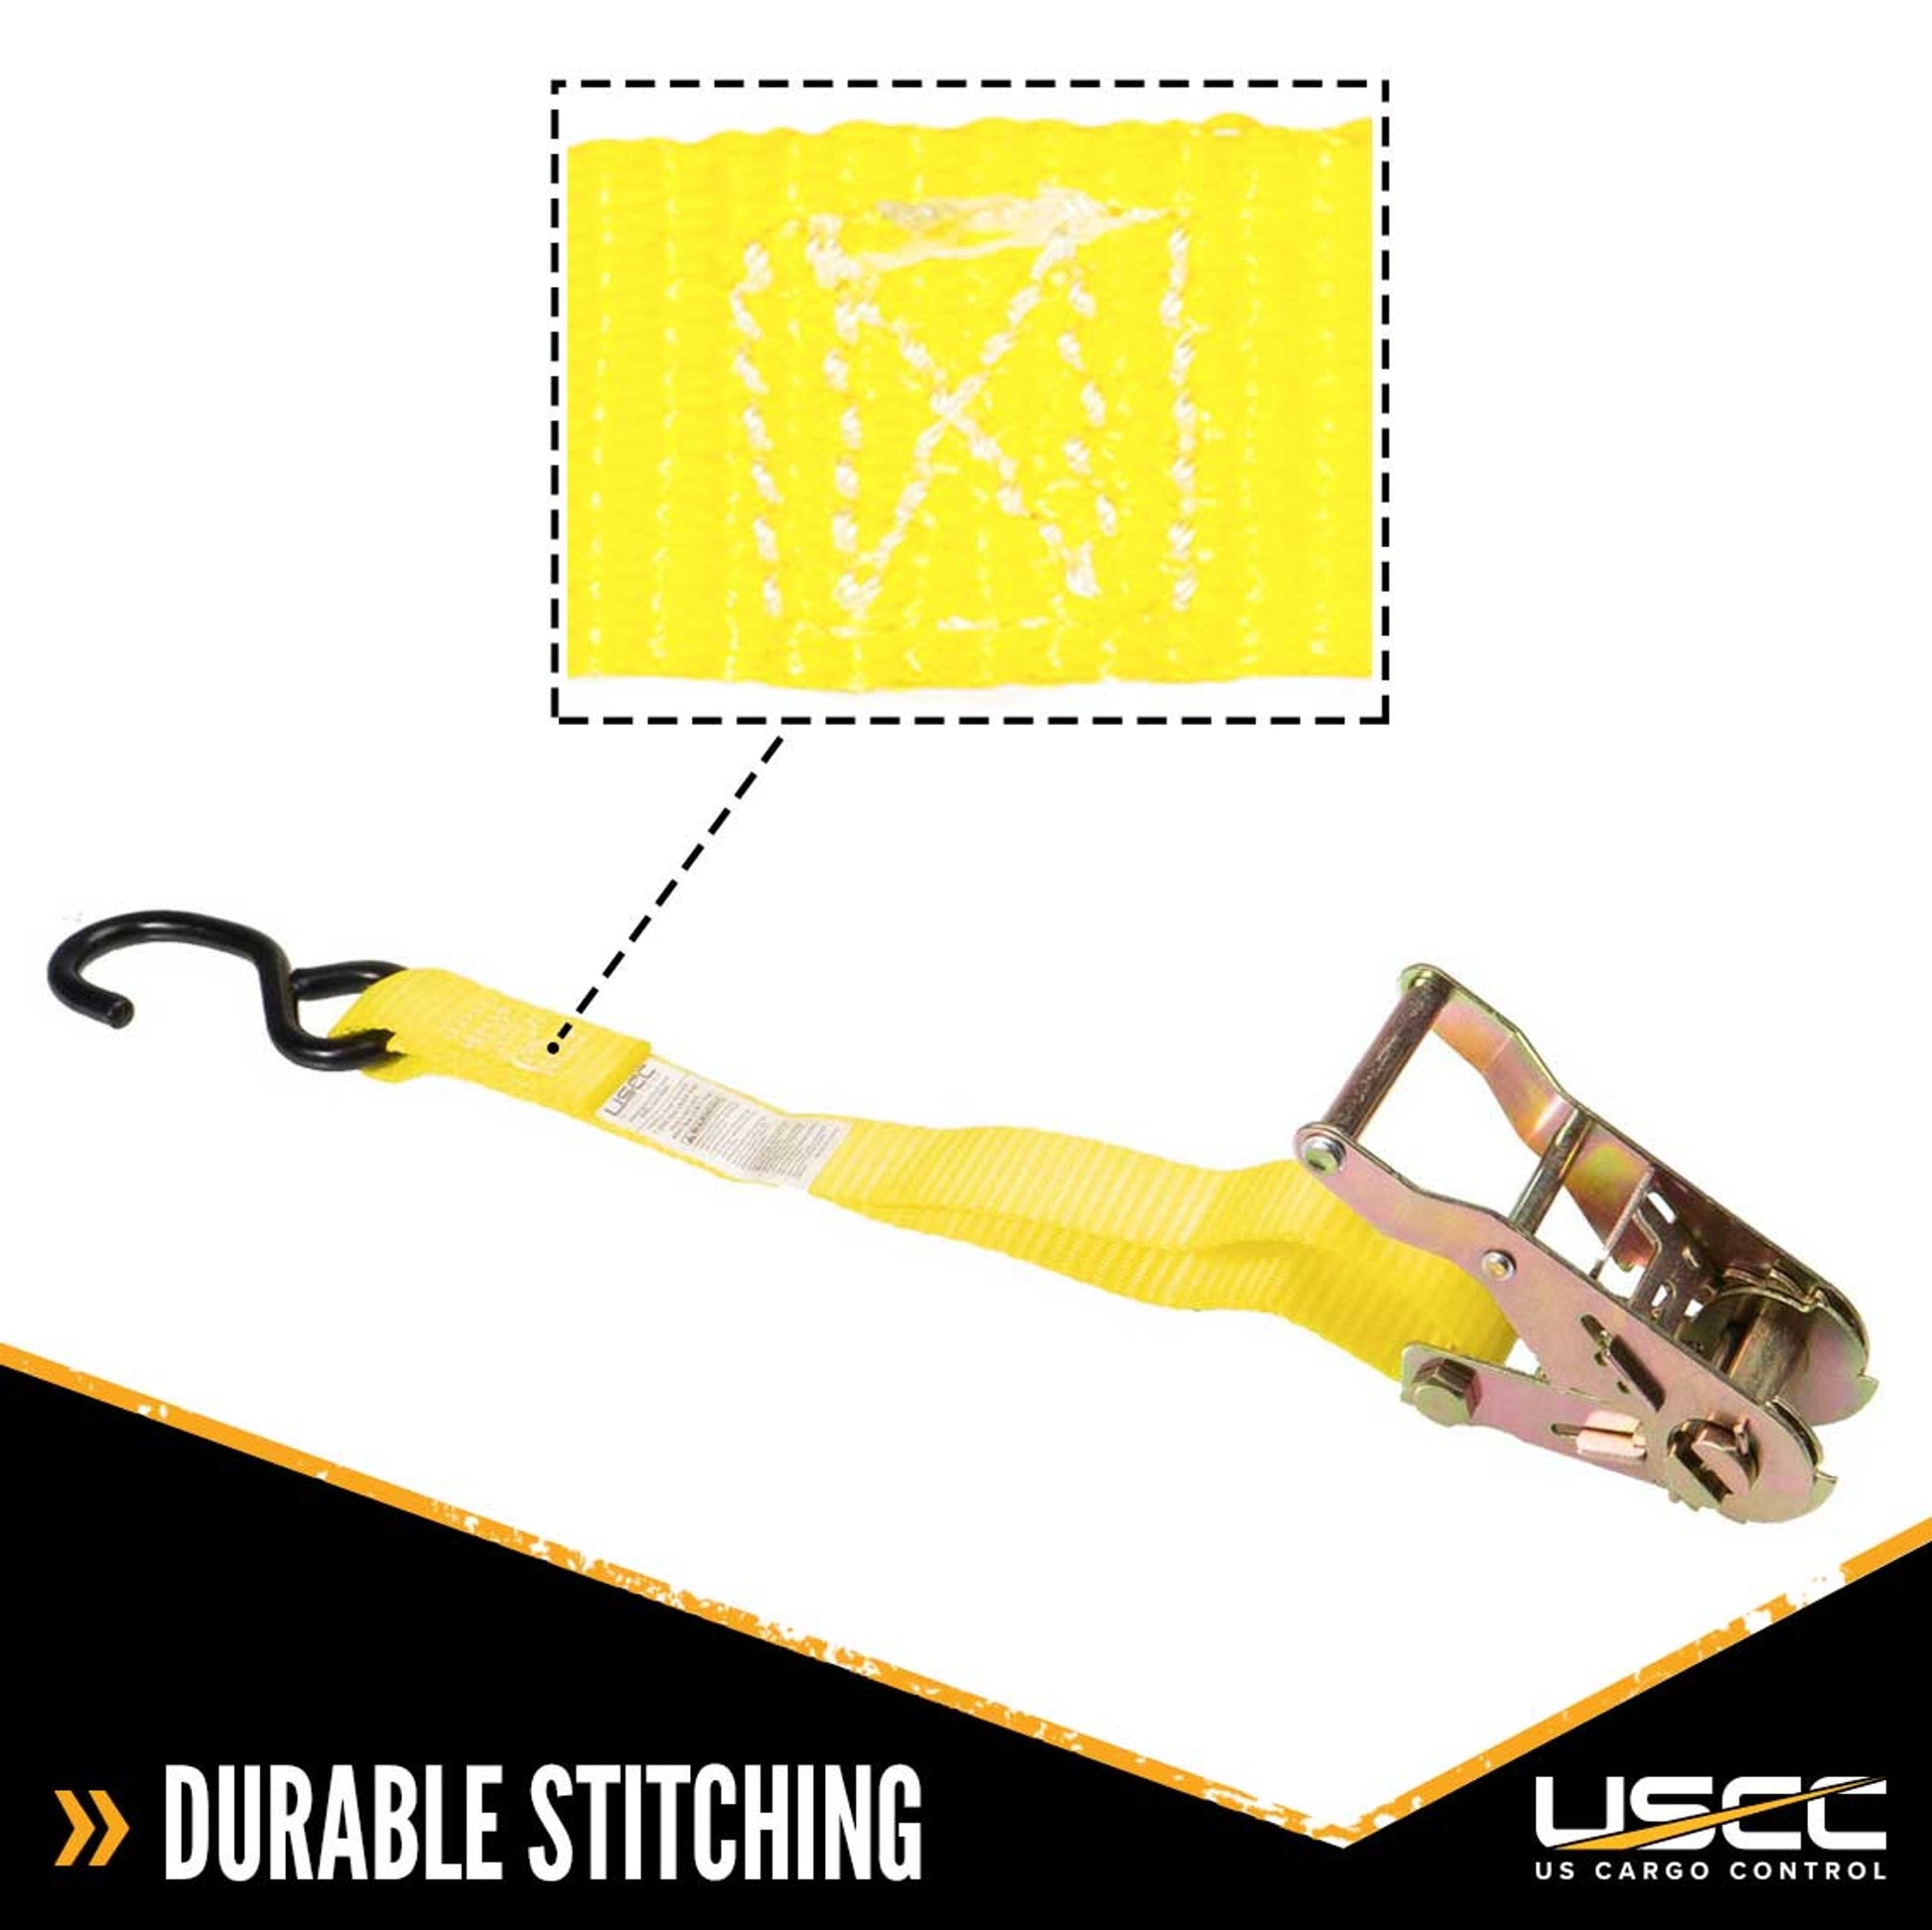 1" x 15' Ratchet Strap w/ S-Hook - 4 pack image 5 of 10